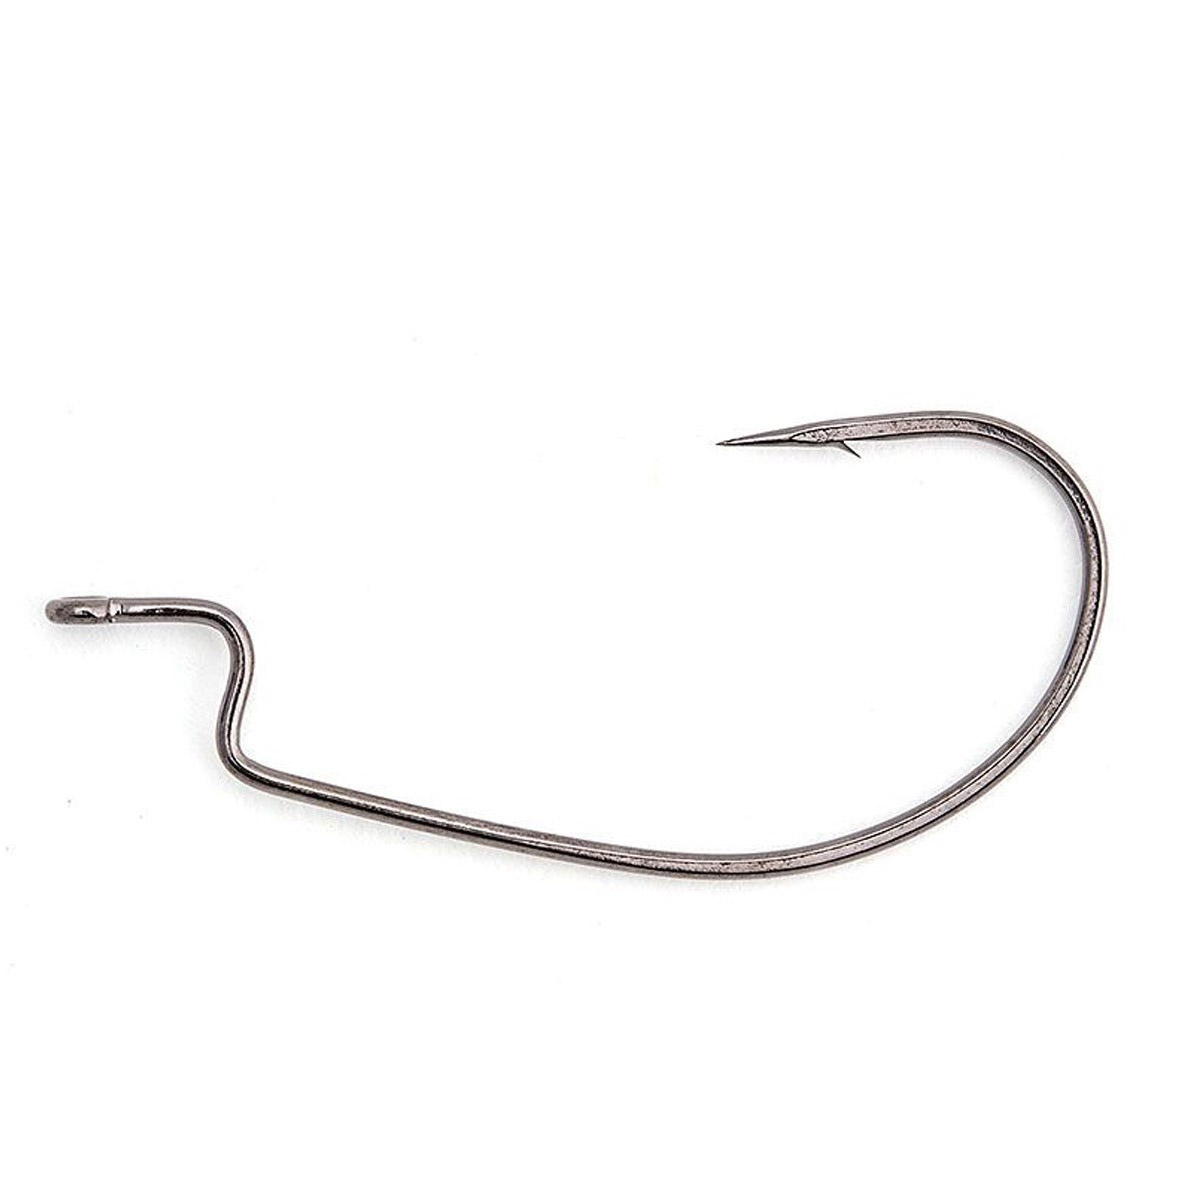 Decoy S.S. Finesse Offset Hook Worm 19 